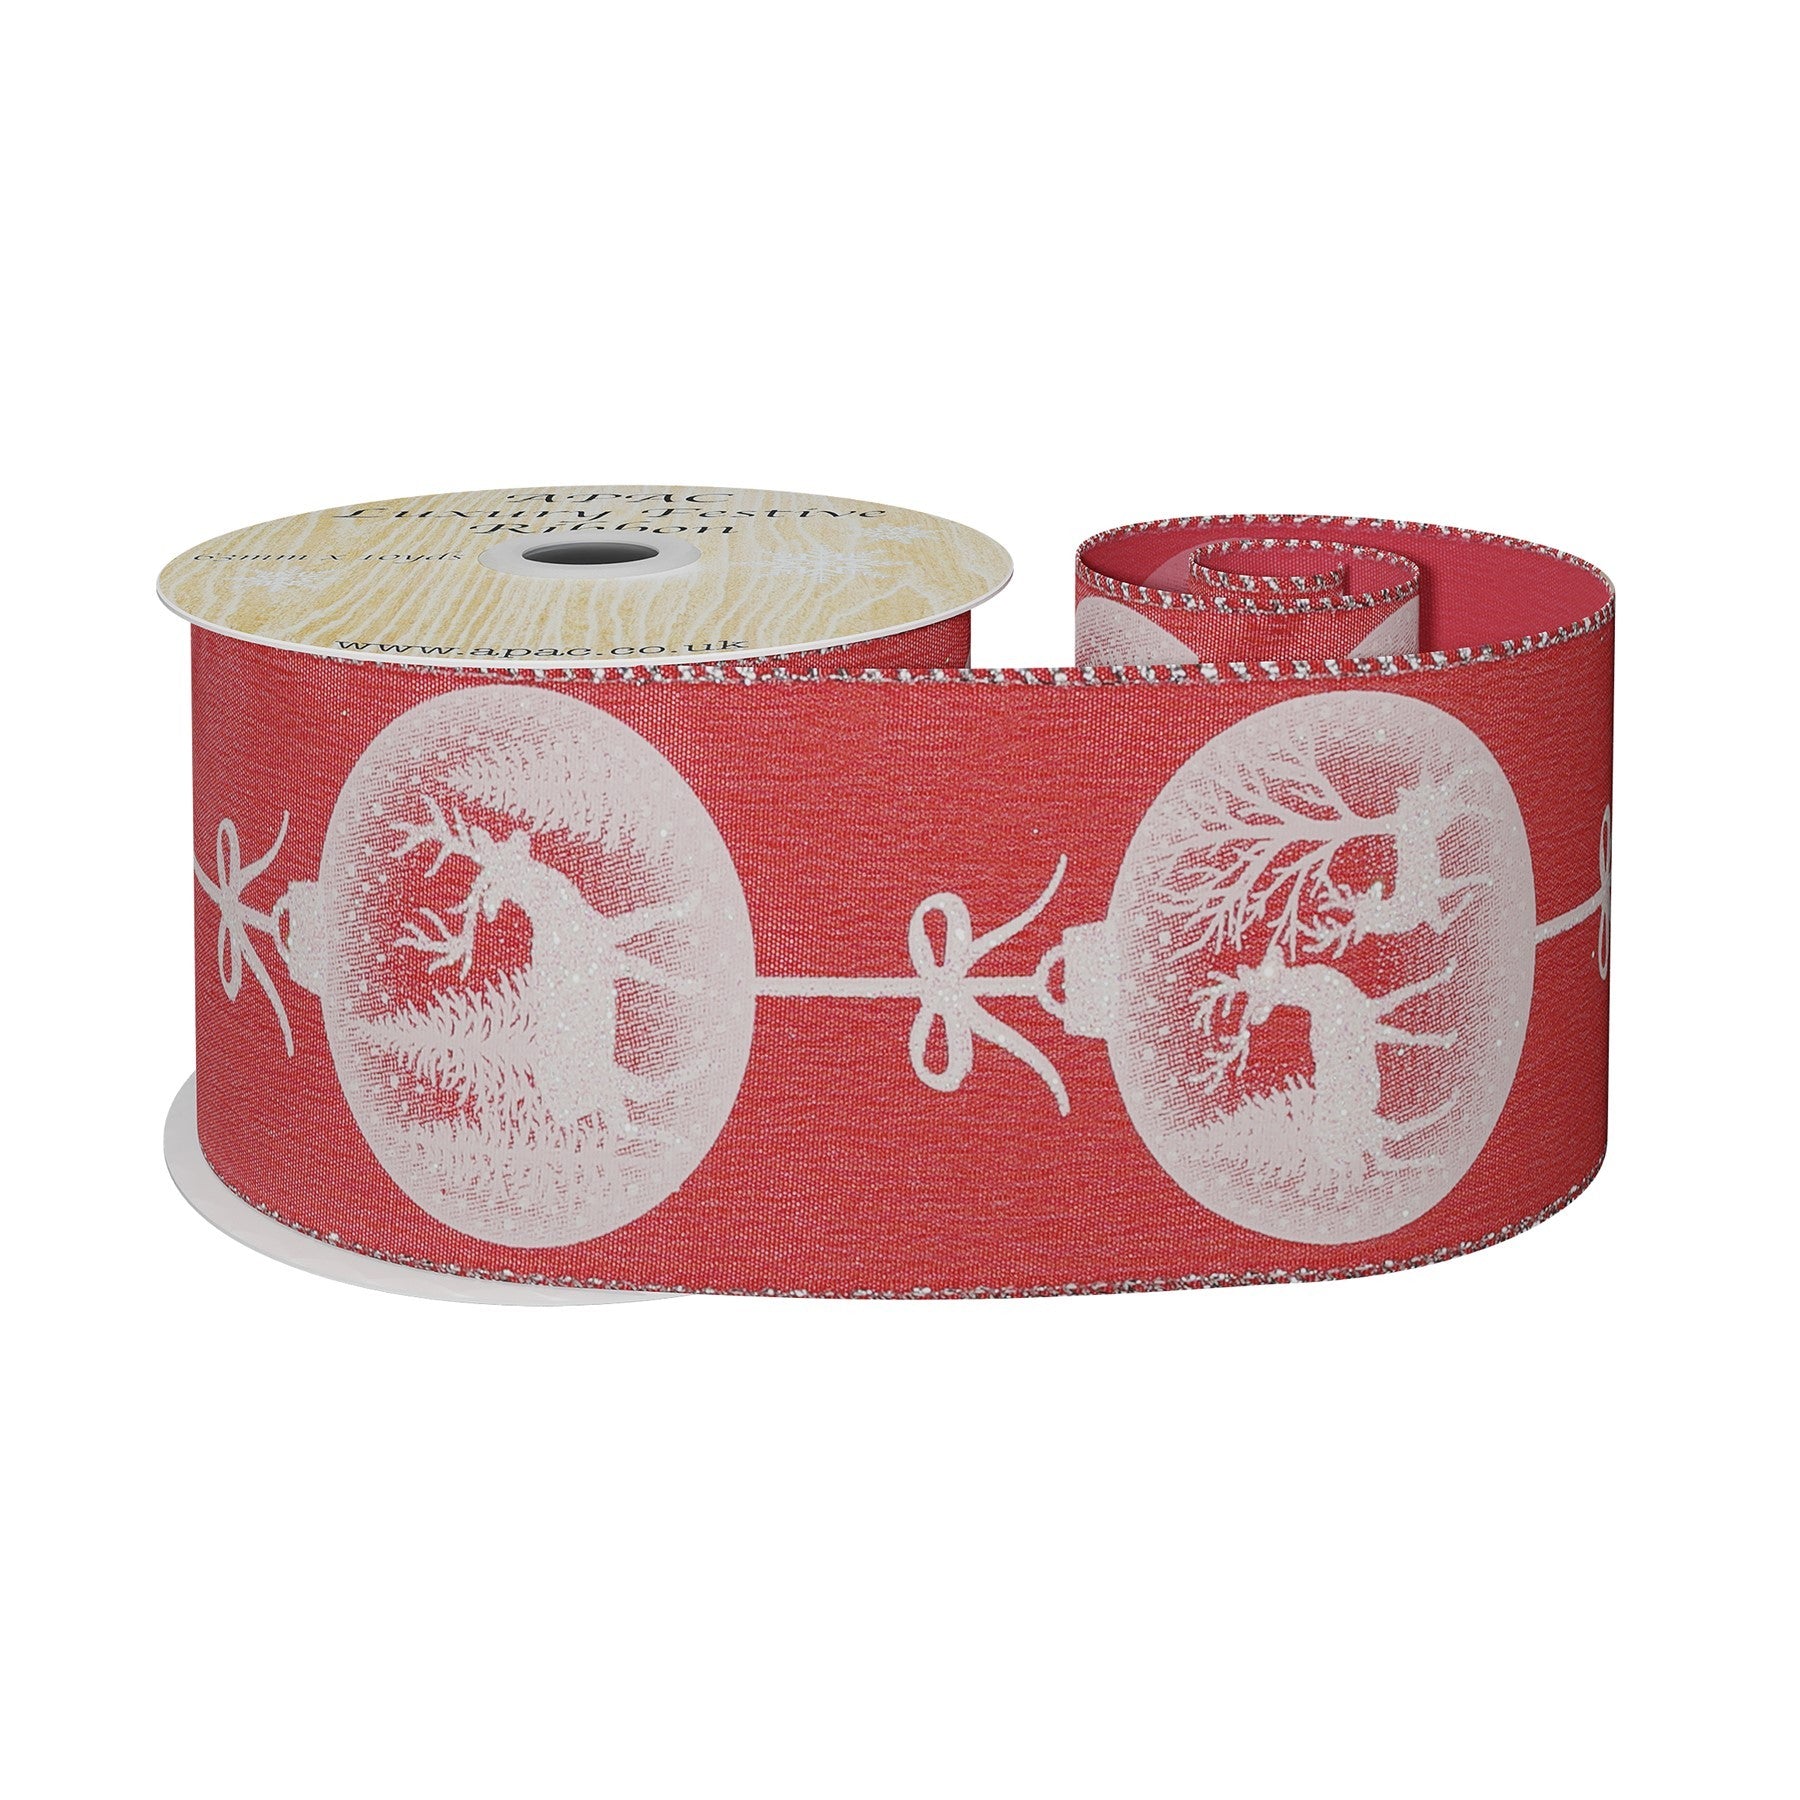 View Red Satin Ribbon with Reindeer Bauble Print White 63mm x 10yd information